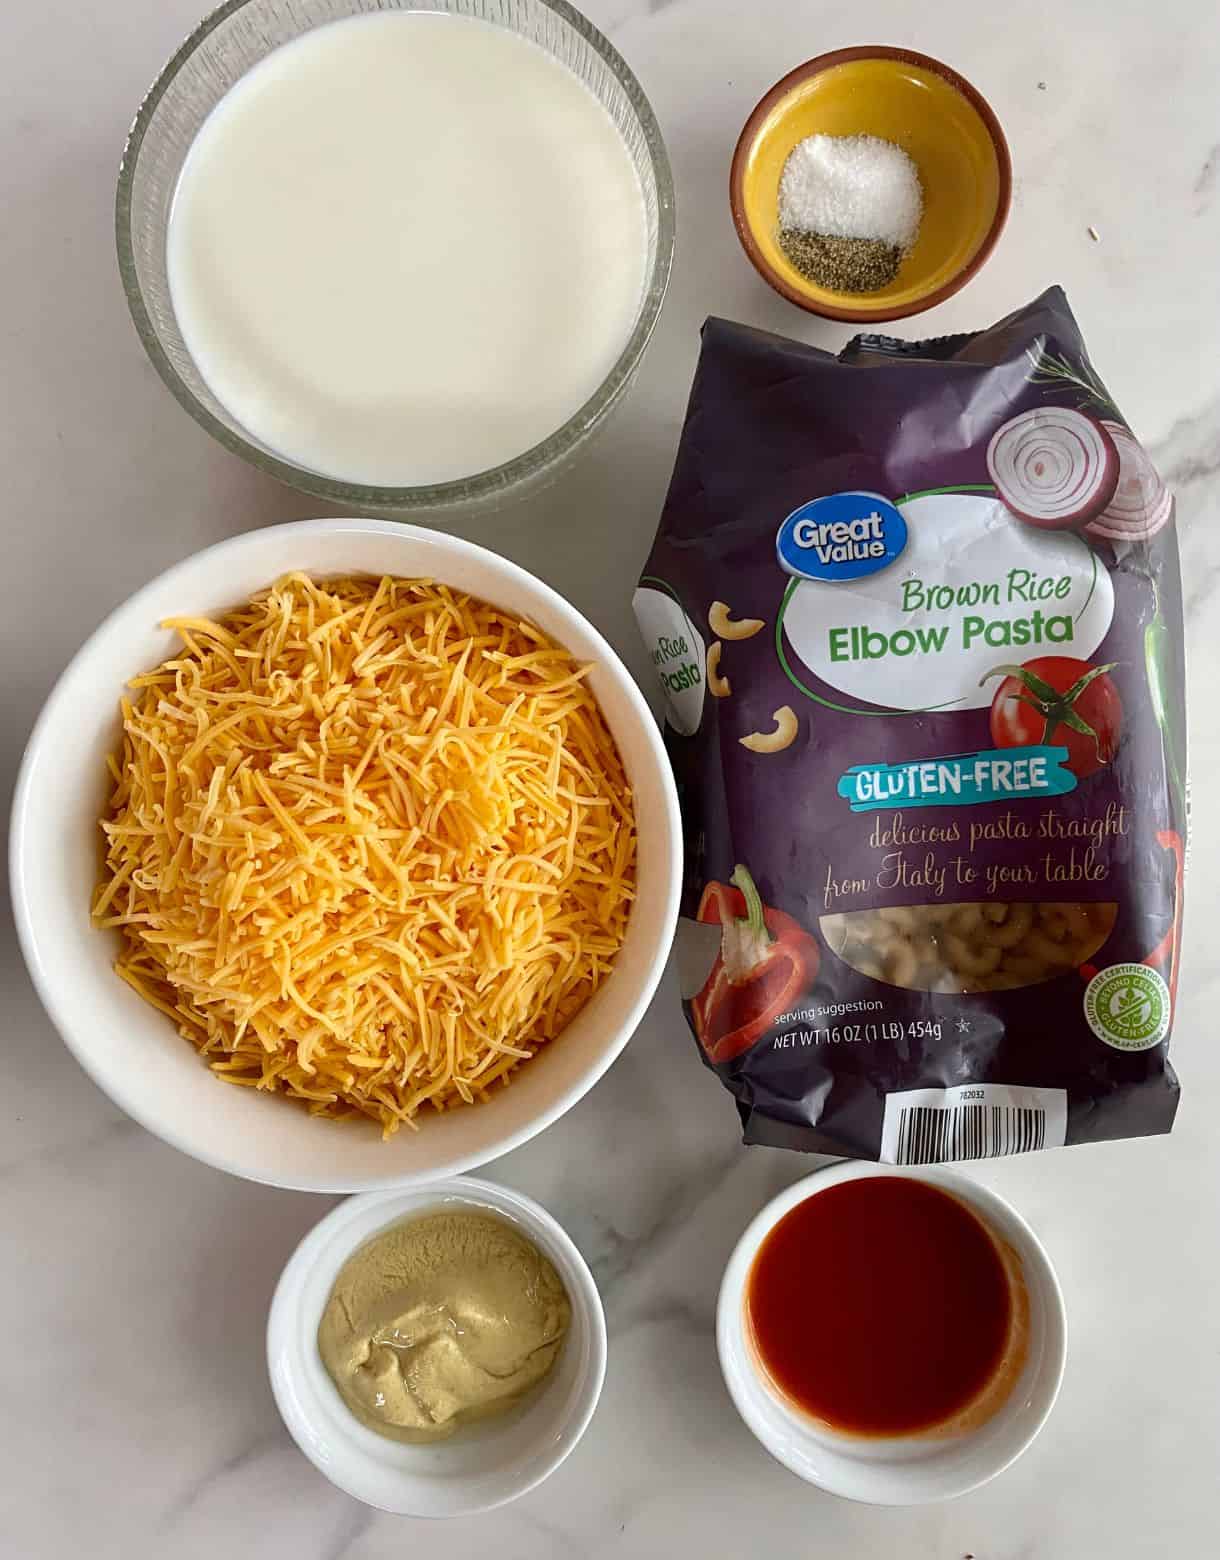 Ingredients for gluten-free mac and cheese. Elbow pasta, shredded cheddar cheese, milk, salt, pepper, hot sauce and dijon mustard.